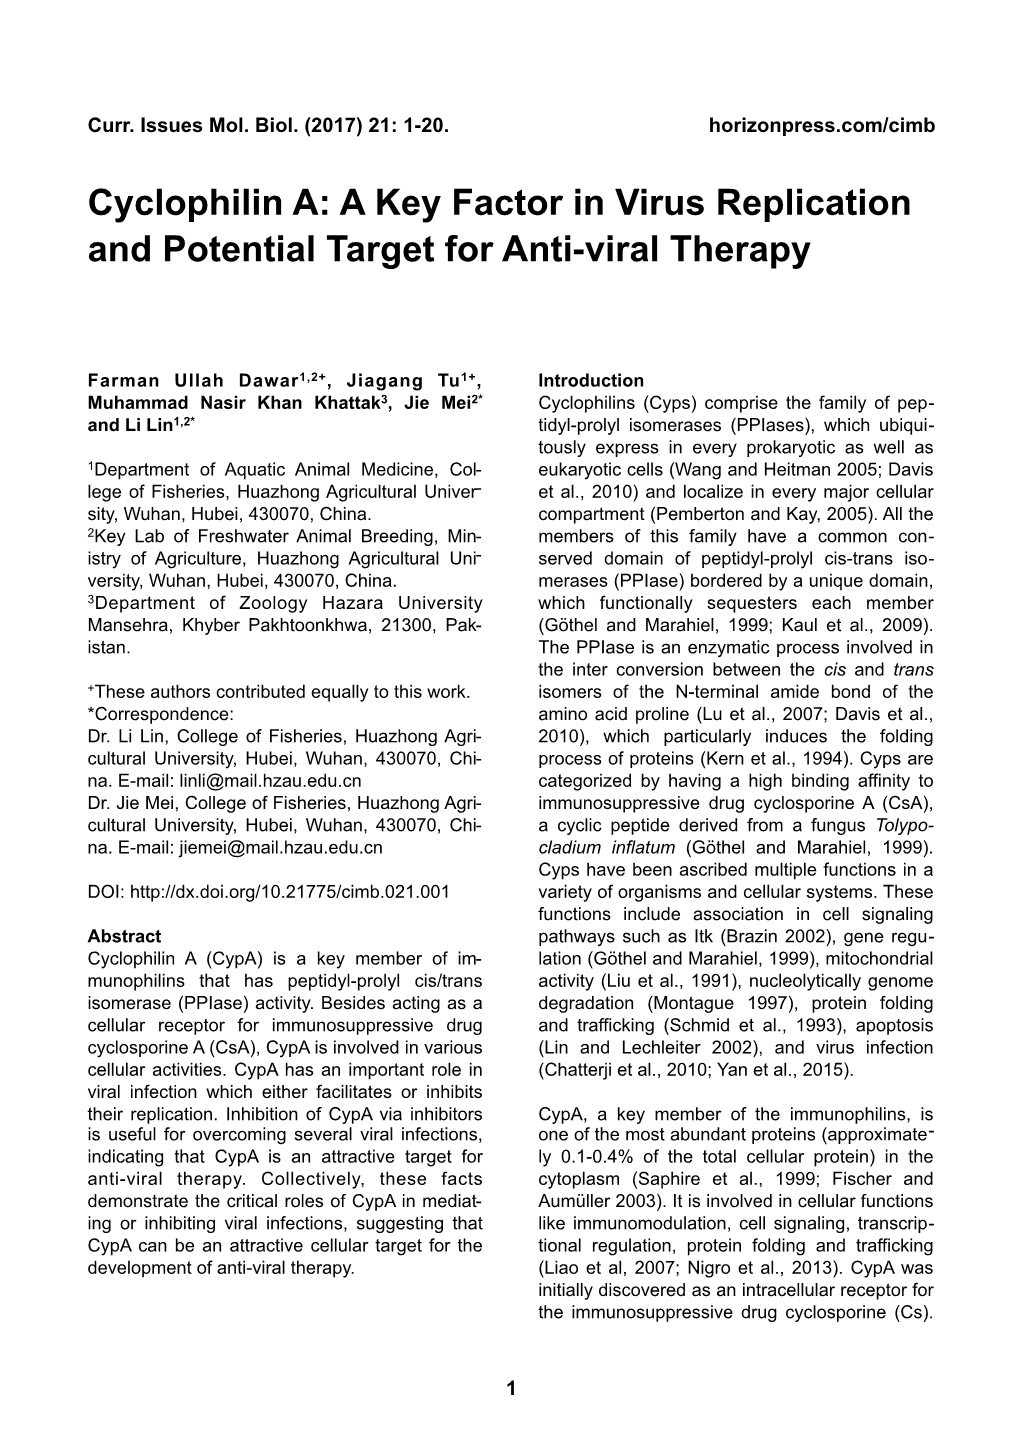 A Key Factor in Virus Replication and Potential Target for Anti-Viral Therapy